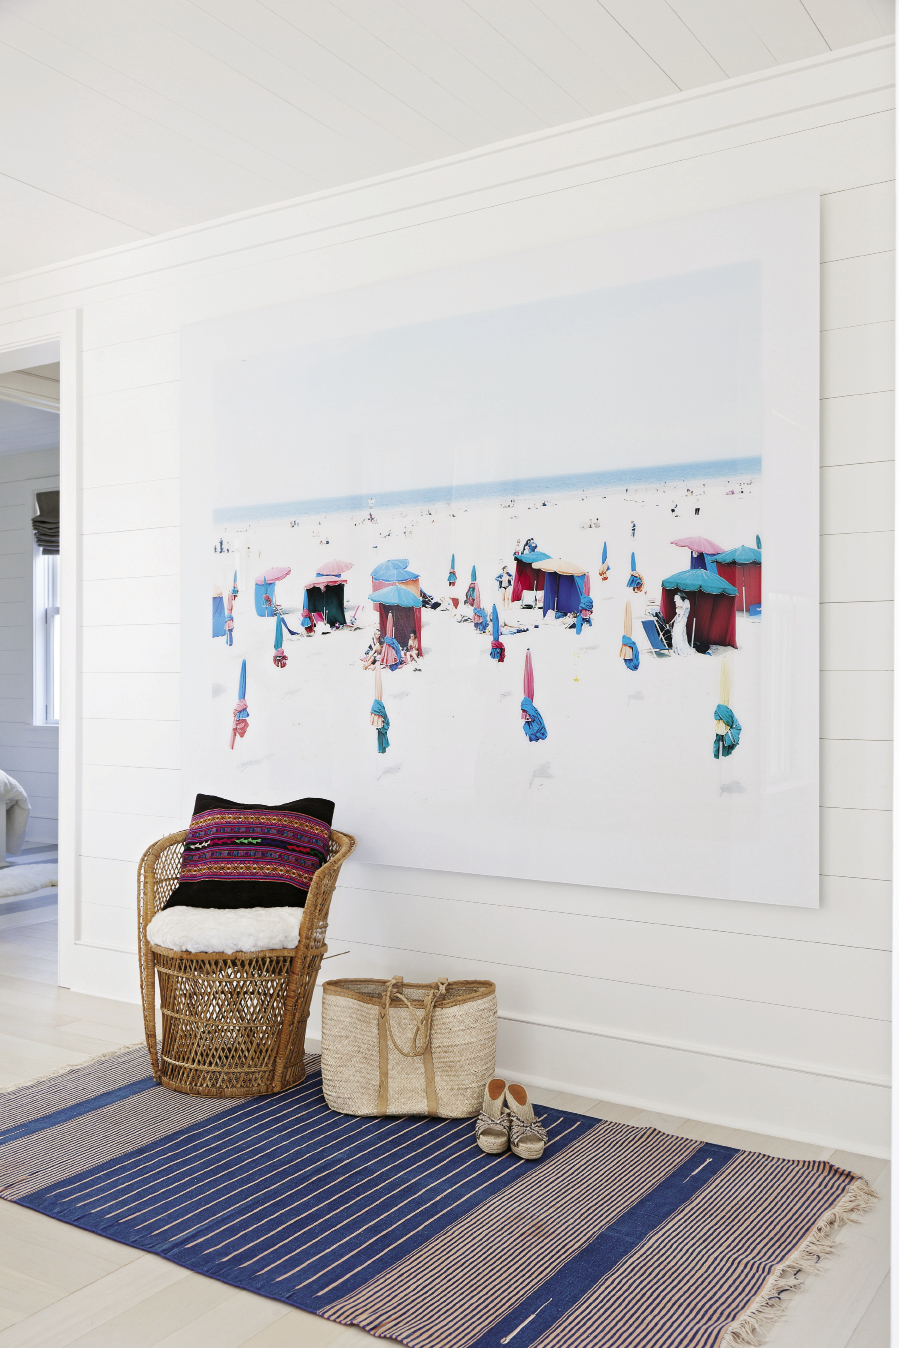 A wall-size panorama by Italian photographer Massimo Vitali makes for captivating beach viewing inside and out.